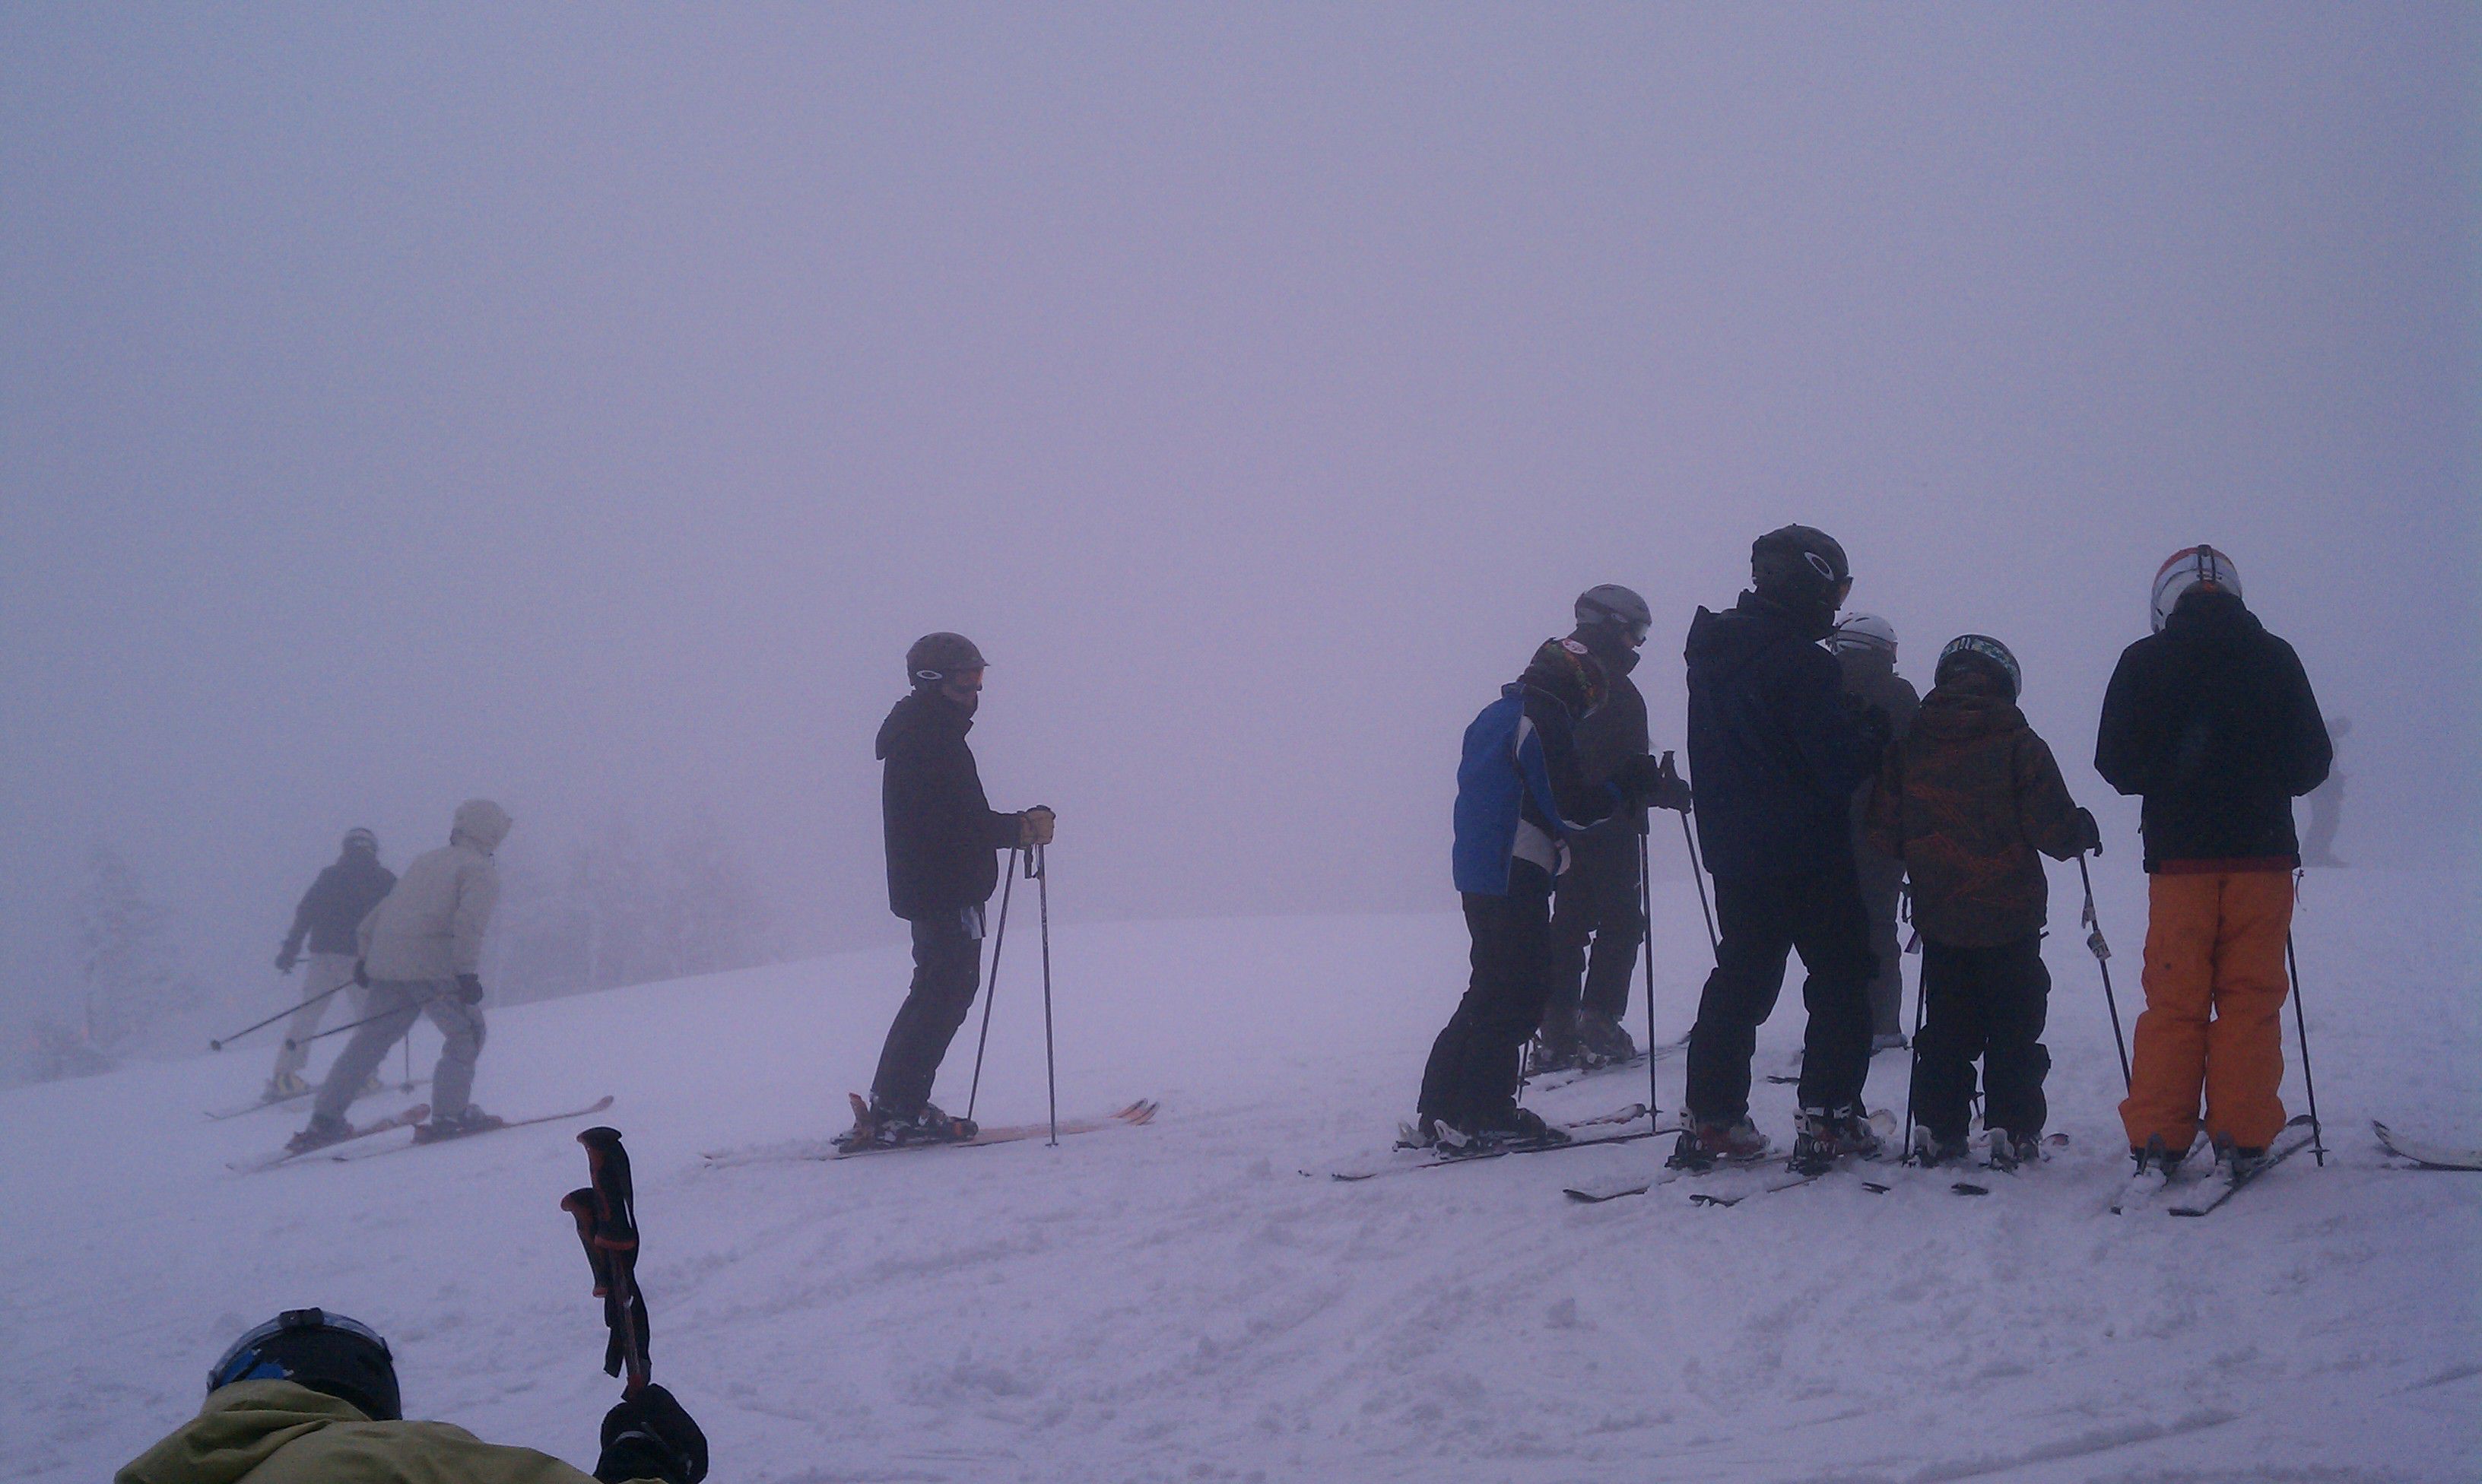 Socked in at the top